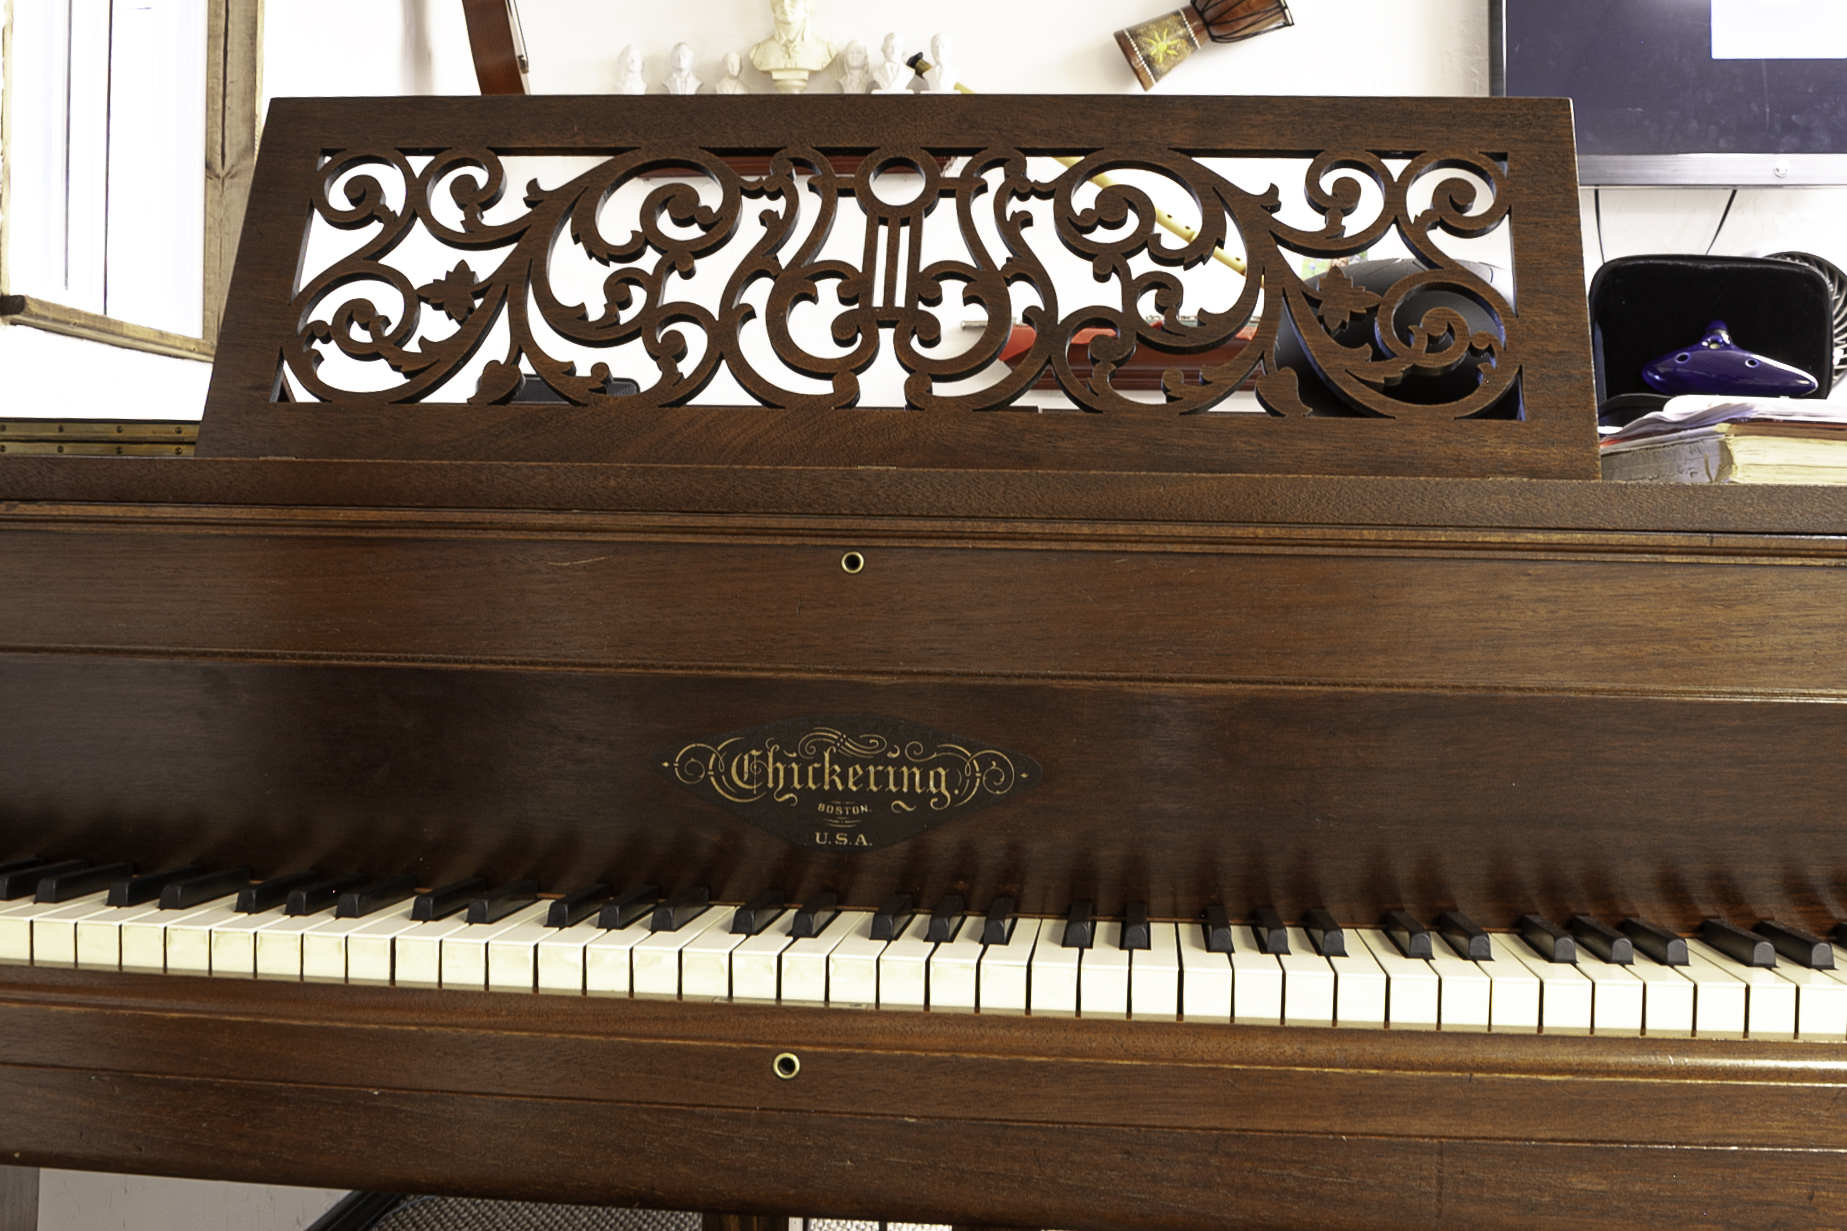 Chickering piano keyboard front view